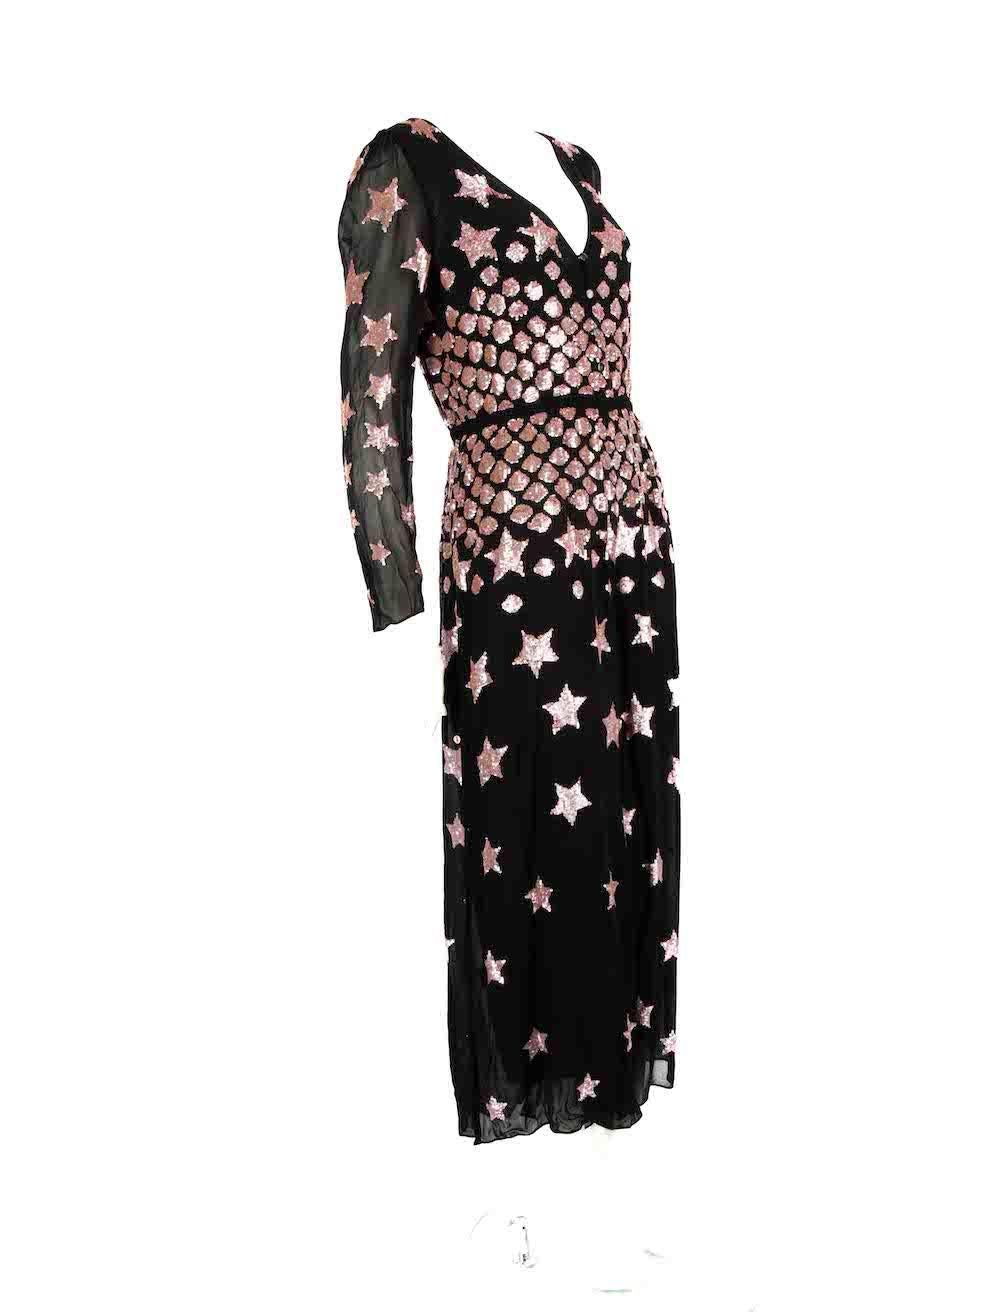 CONDITION is Good. Minor wear to jumpsuit is evident. Light wear to the left shoulder seam with a small tear and the embellishment across the front and back is missing some sequins on this used Temperley London designer resale item.
 
 
 
 Details
